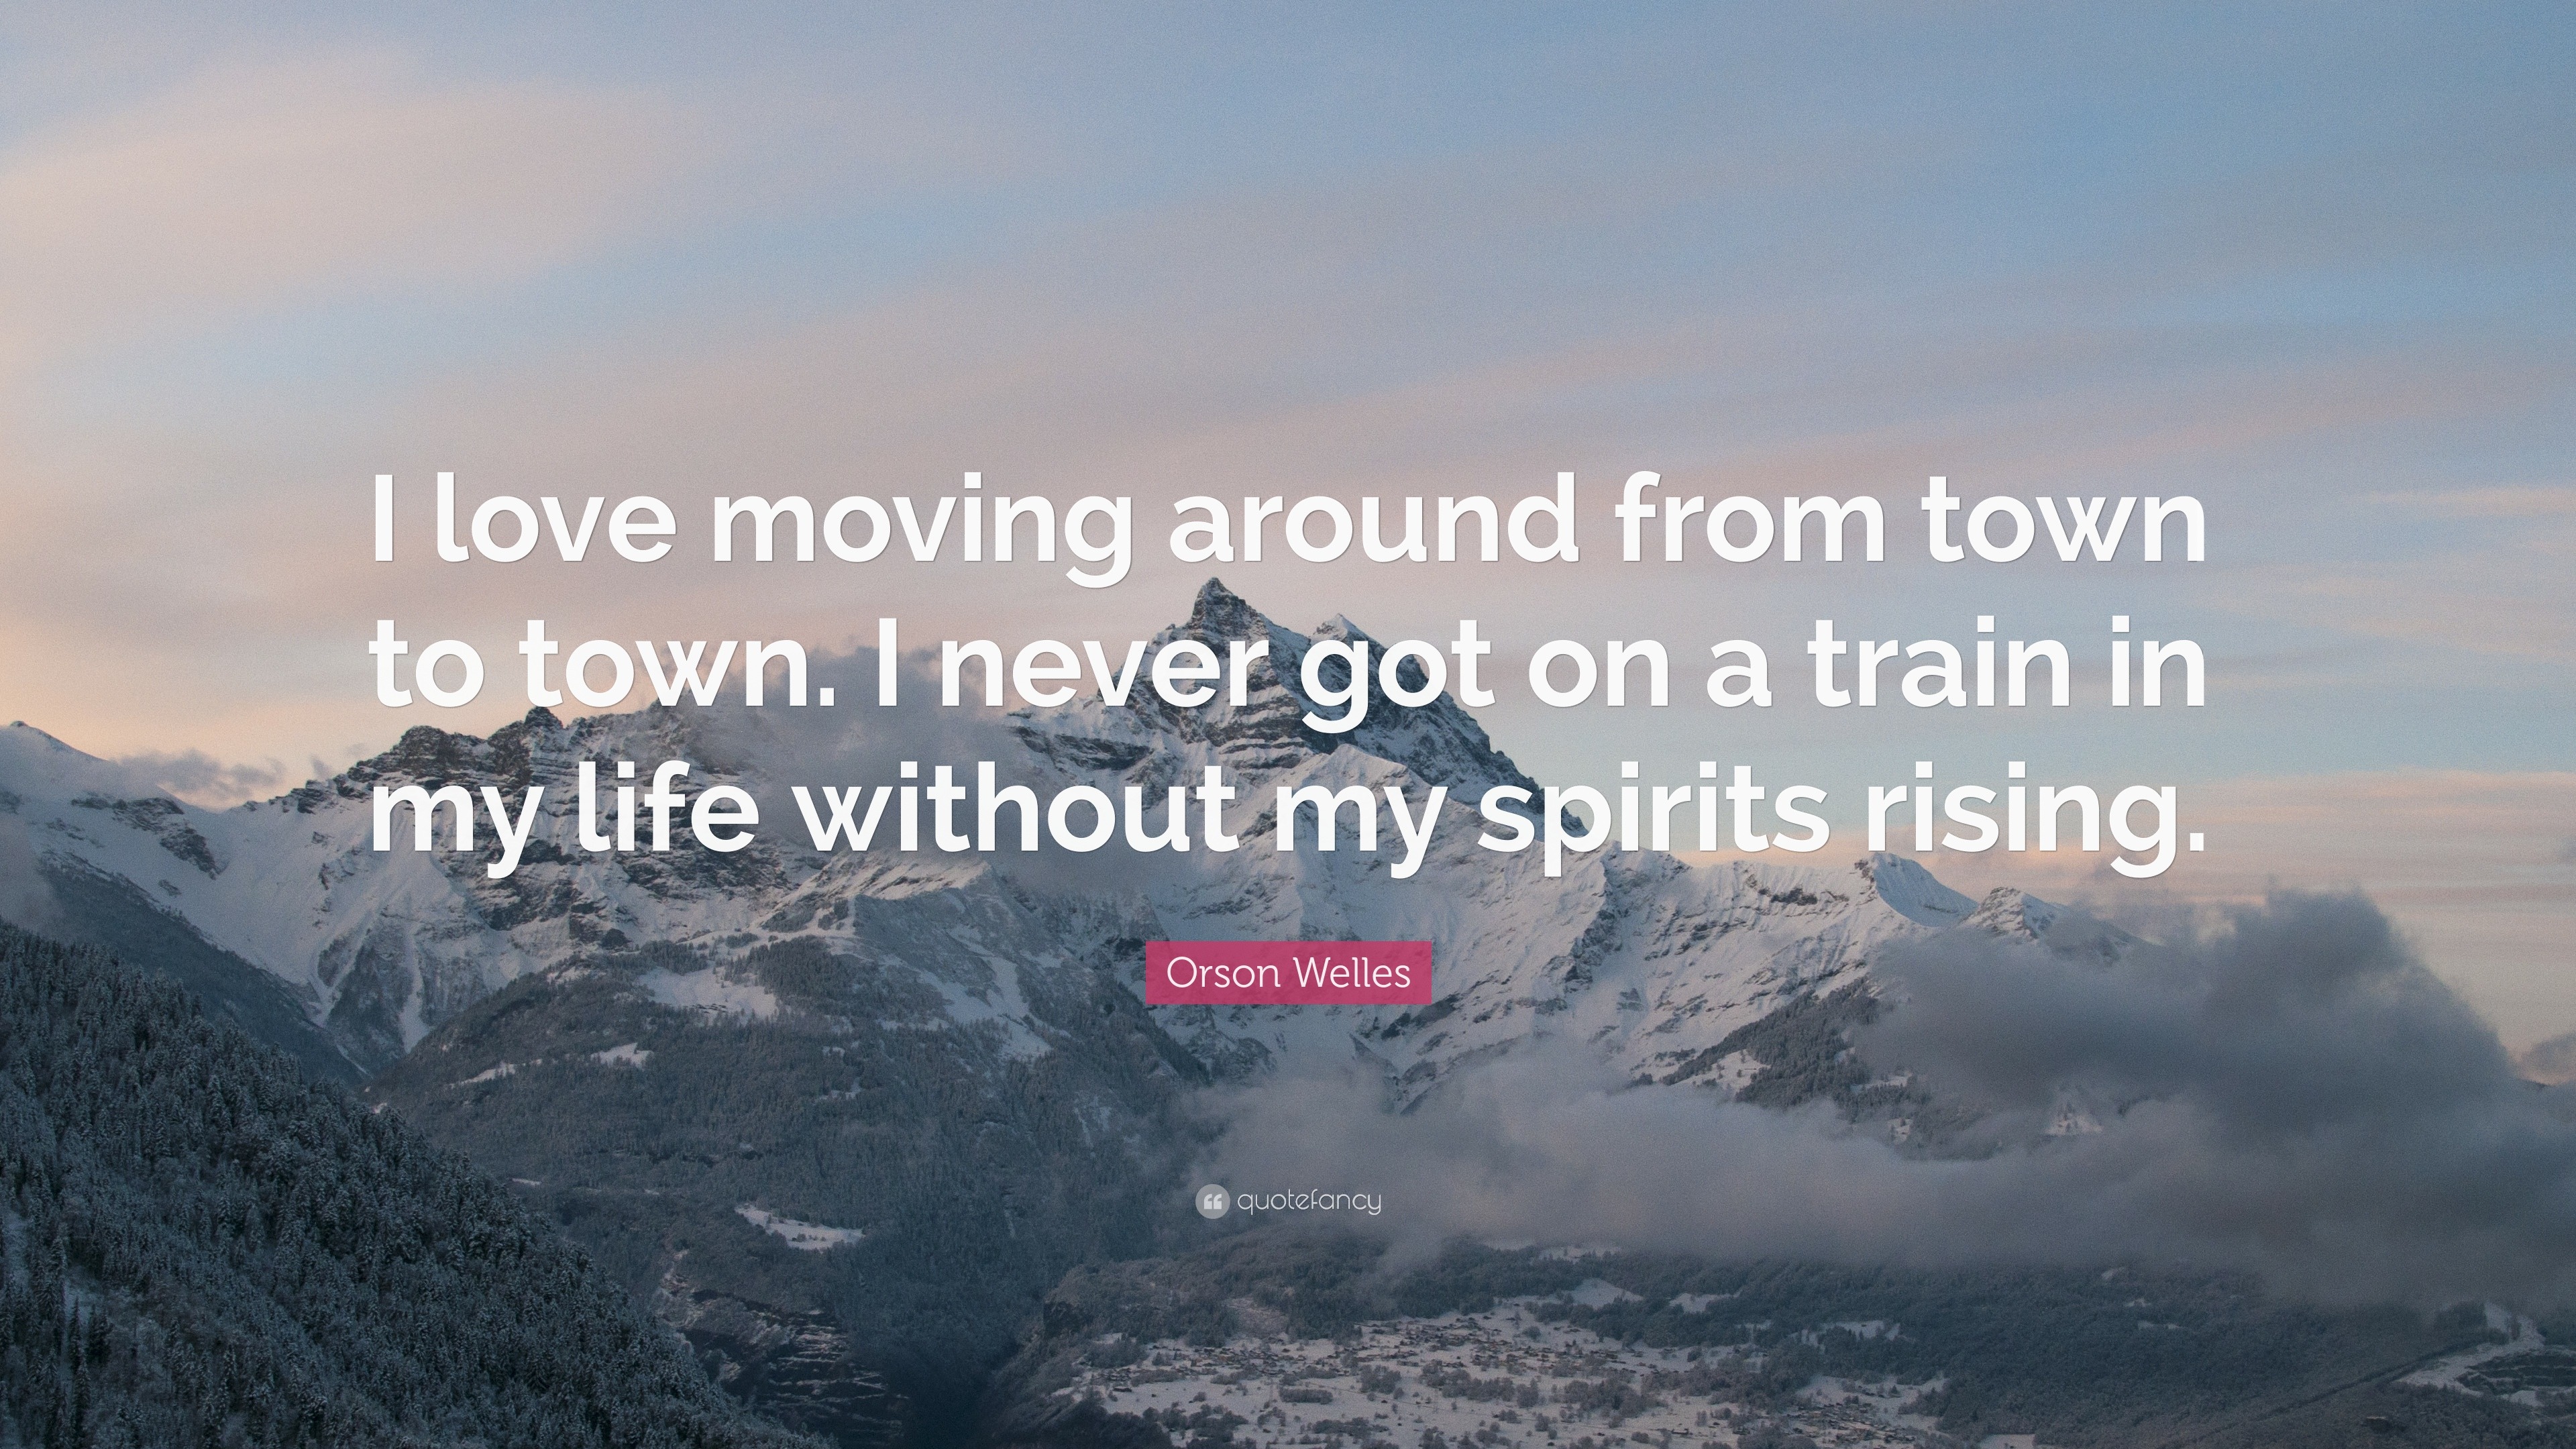 Orson Welles Quote: “I love moving around from town to town. I never ...